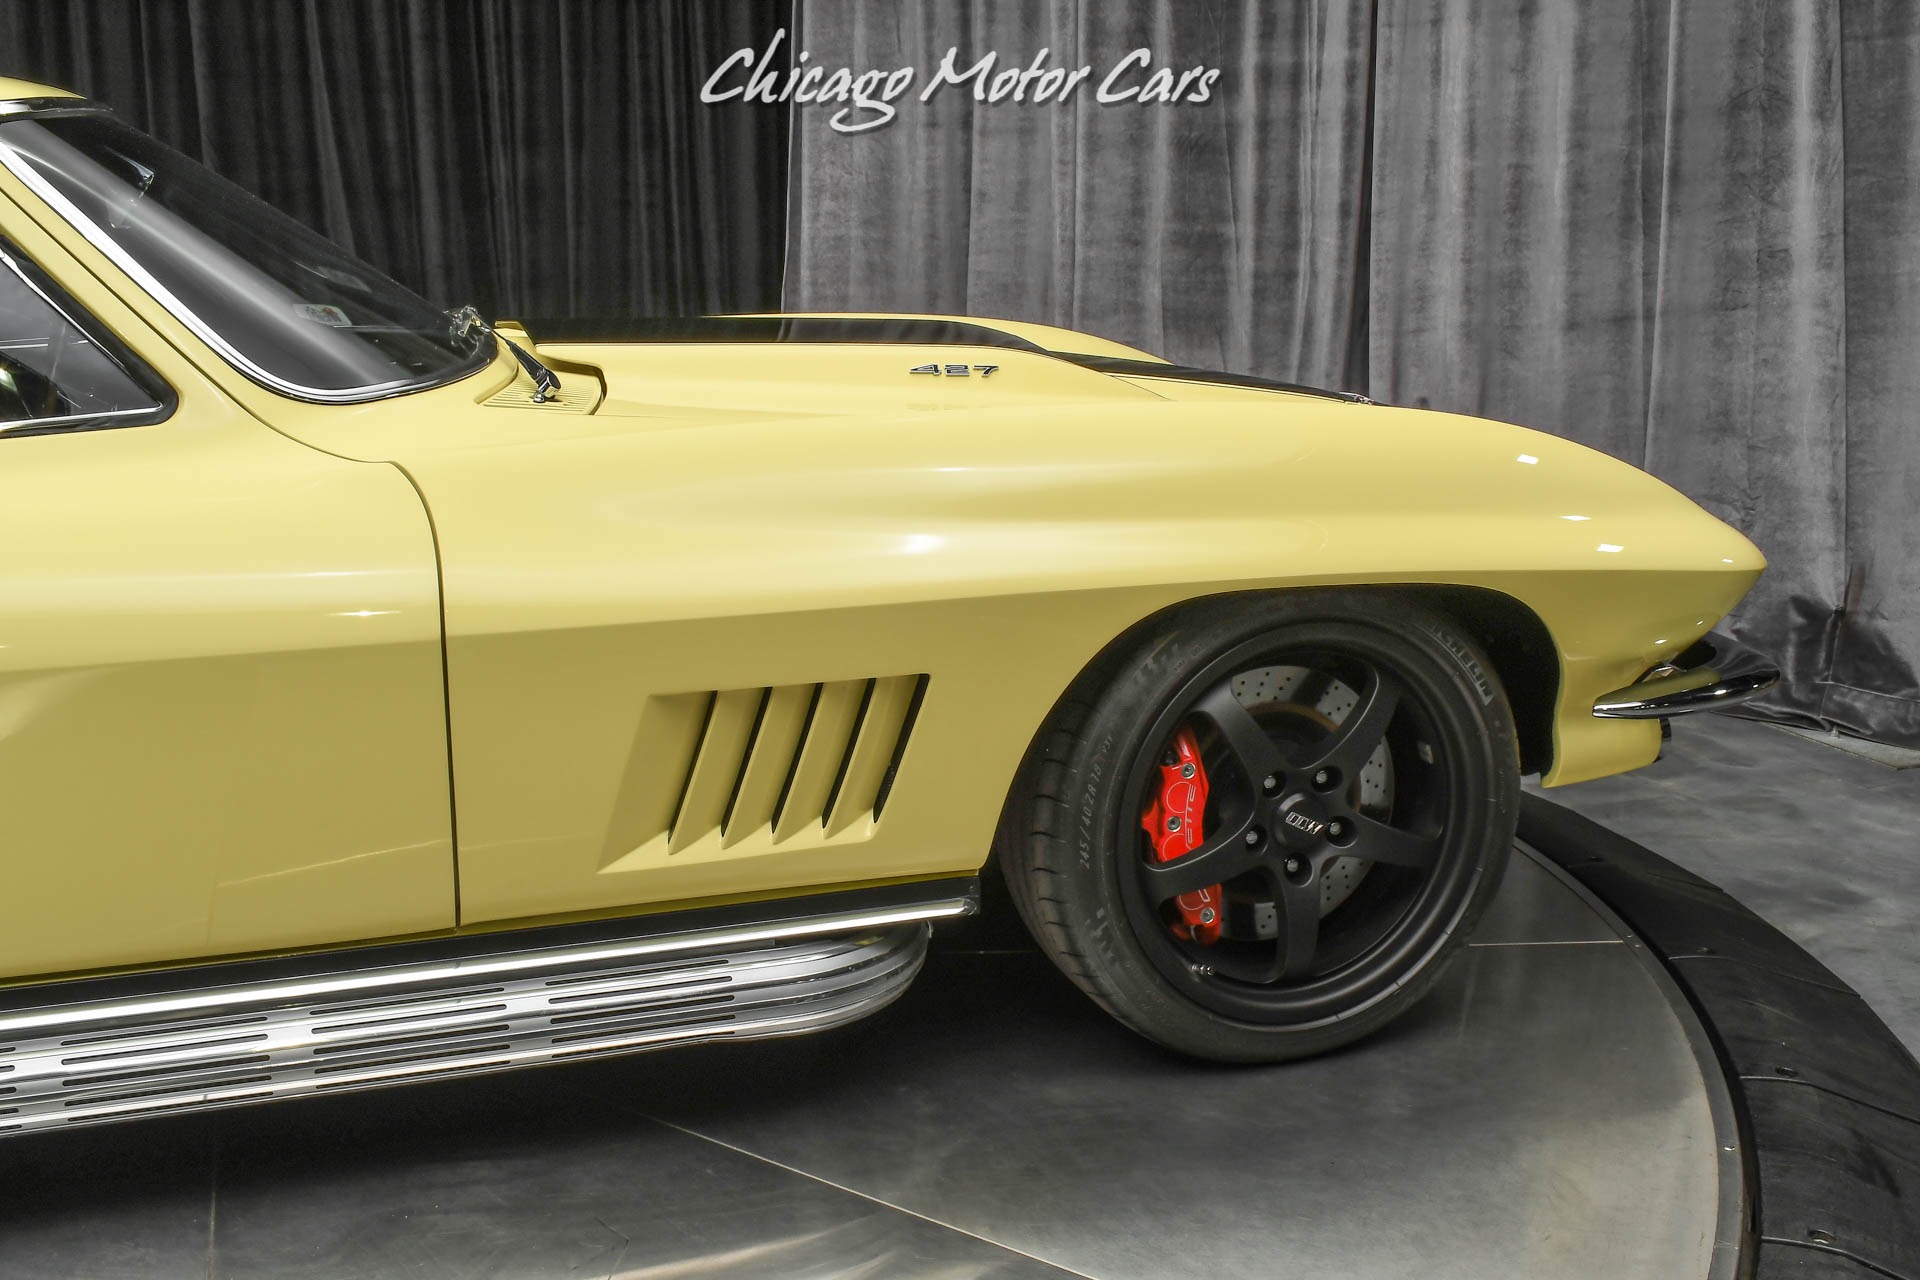 Used-1967-Chevrolet-Corvette-Sunfire-Yellow-Coupe-LS3-62L-V8-525hp-5-Speed-Manual